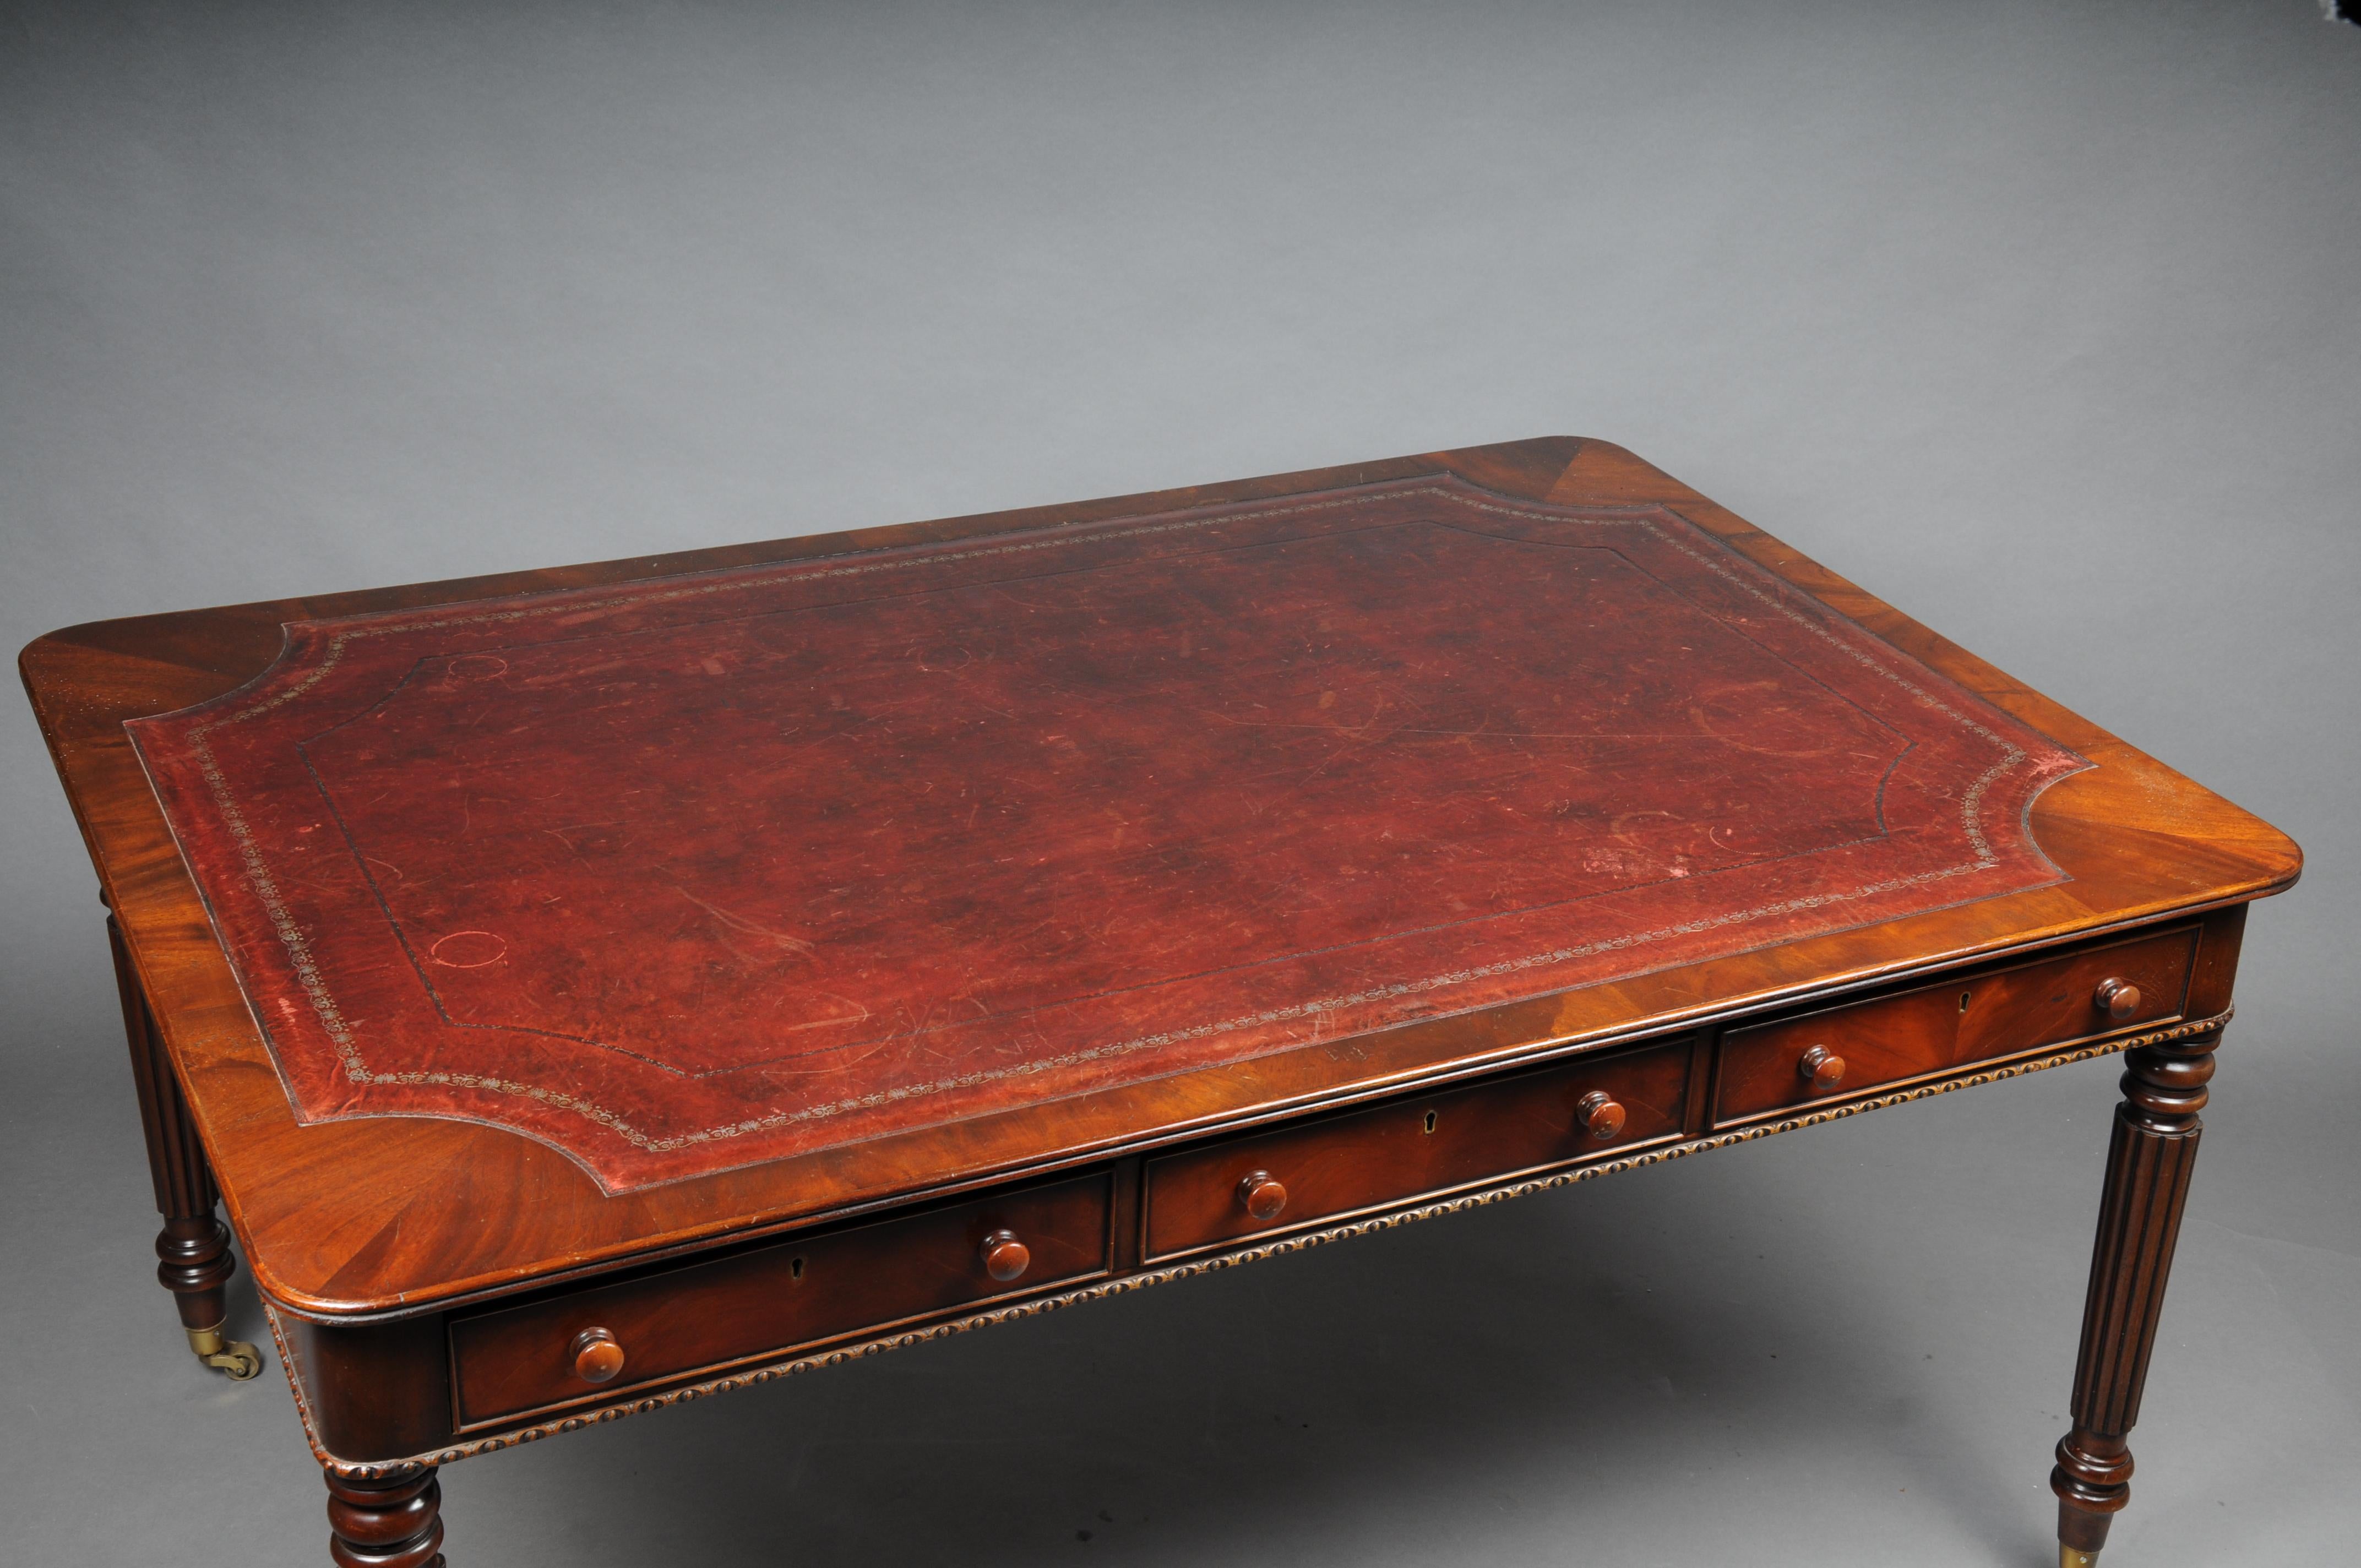 Large Victorian Partner Desk, England, 19th Century, Mahogany with Leather In Good Condition For Sale In Berlin, DE